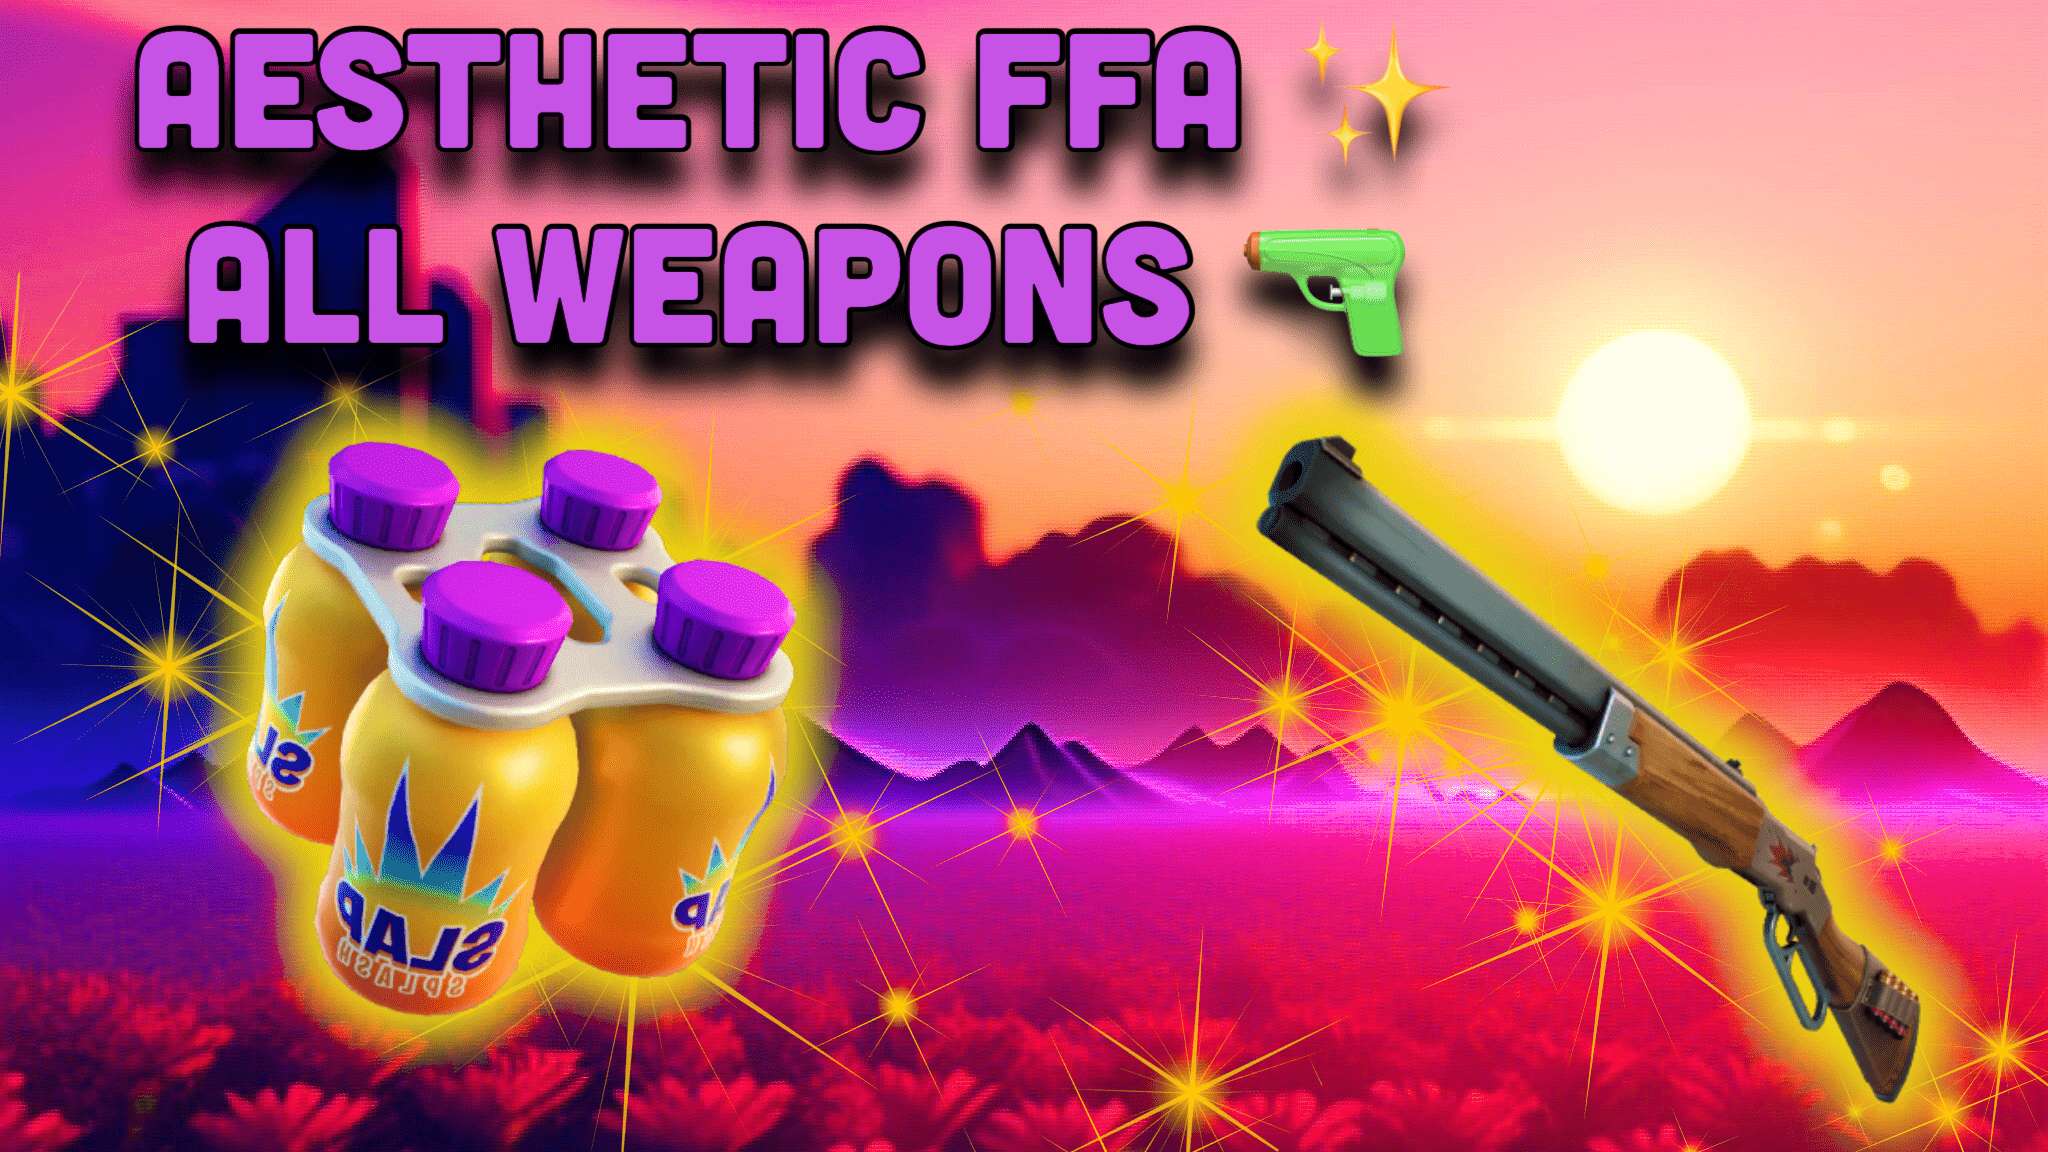 Aesthetic FFA ✨ All Weapons 🔫